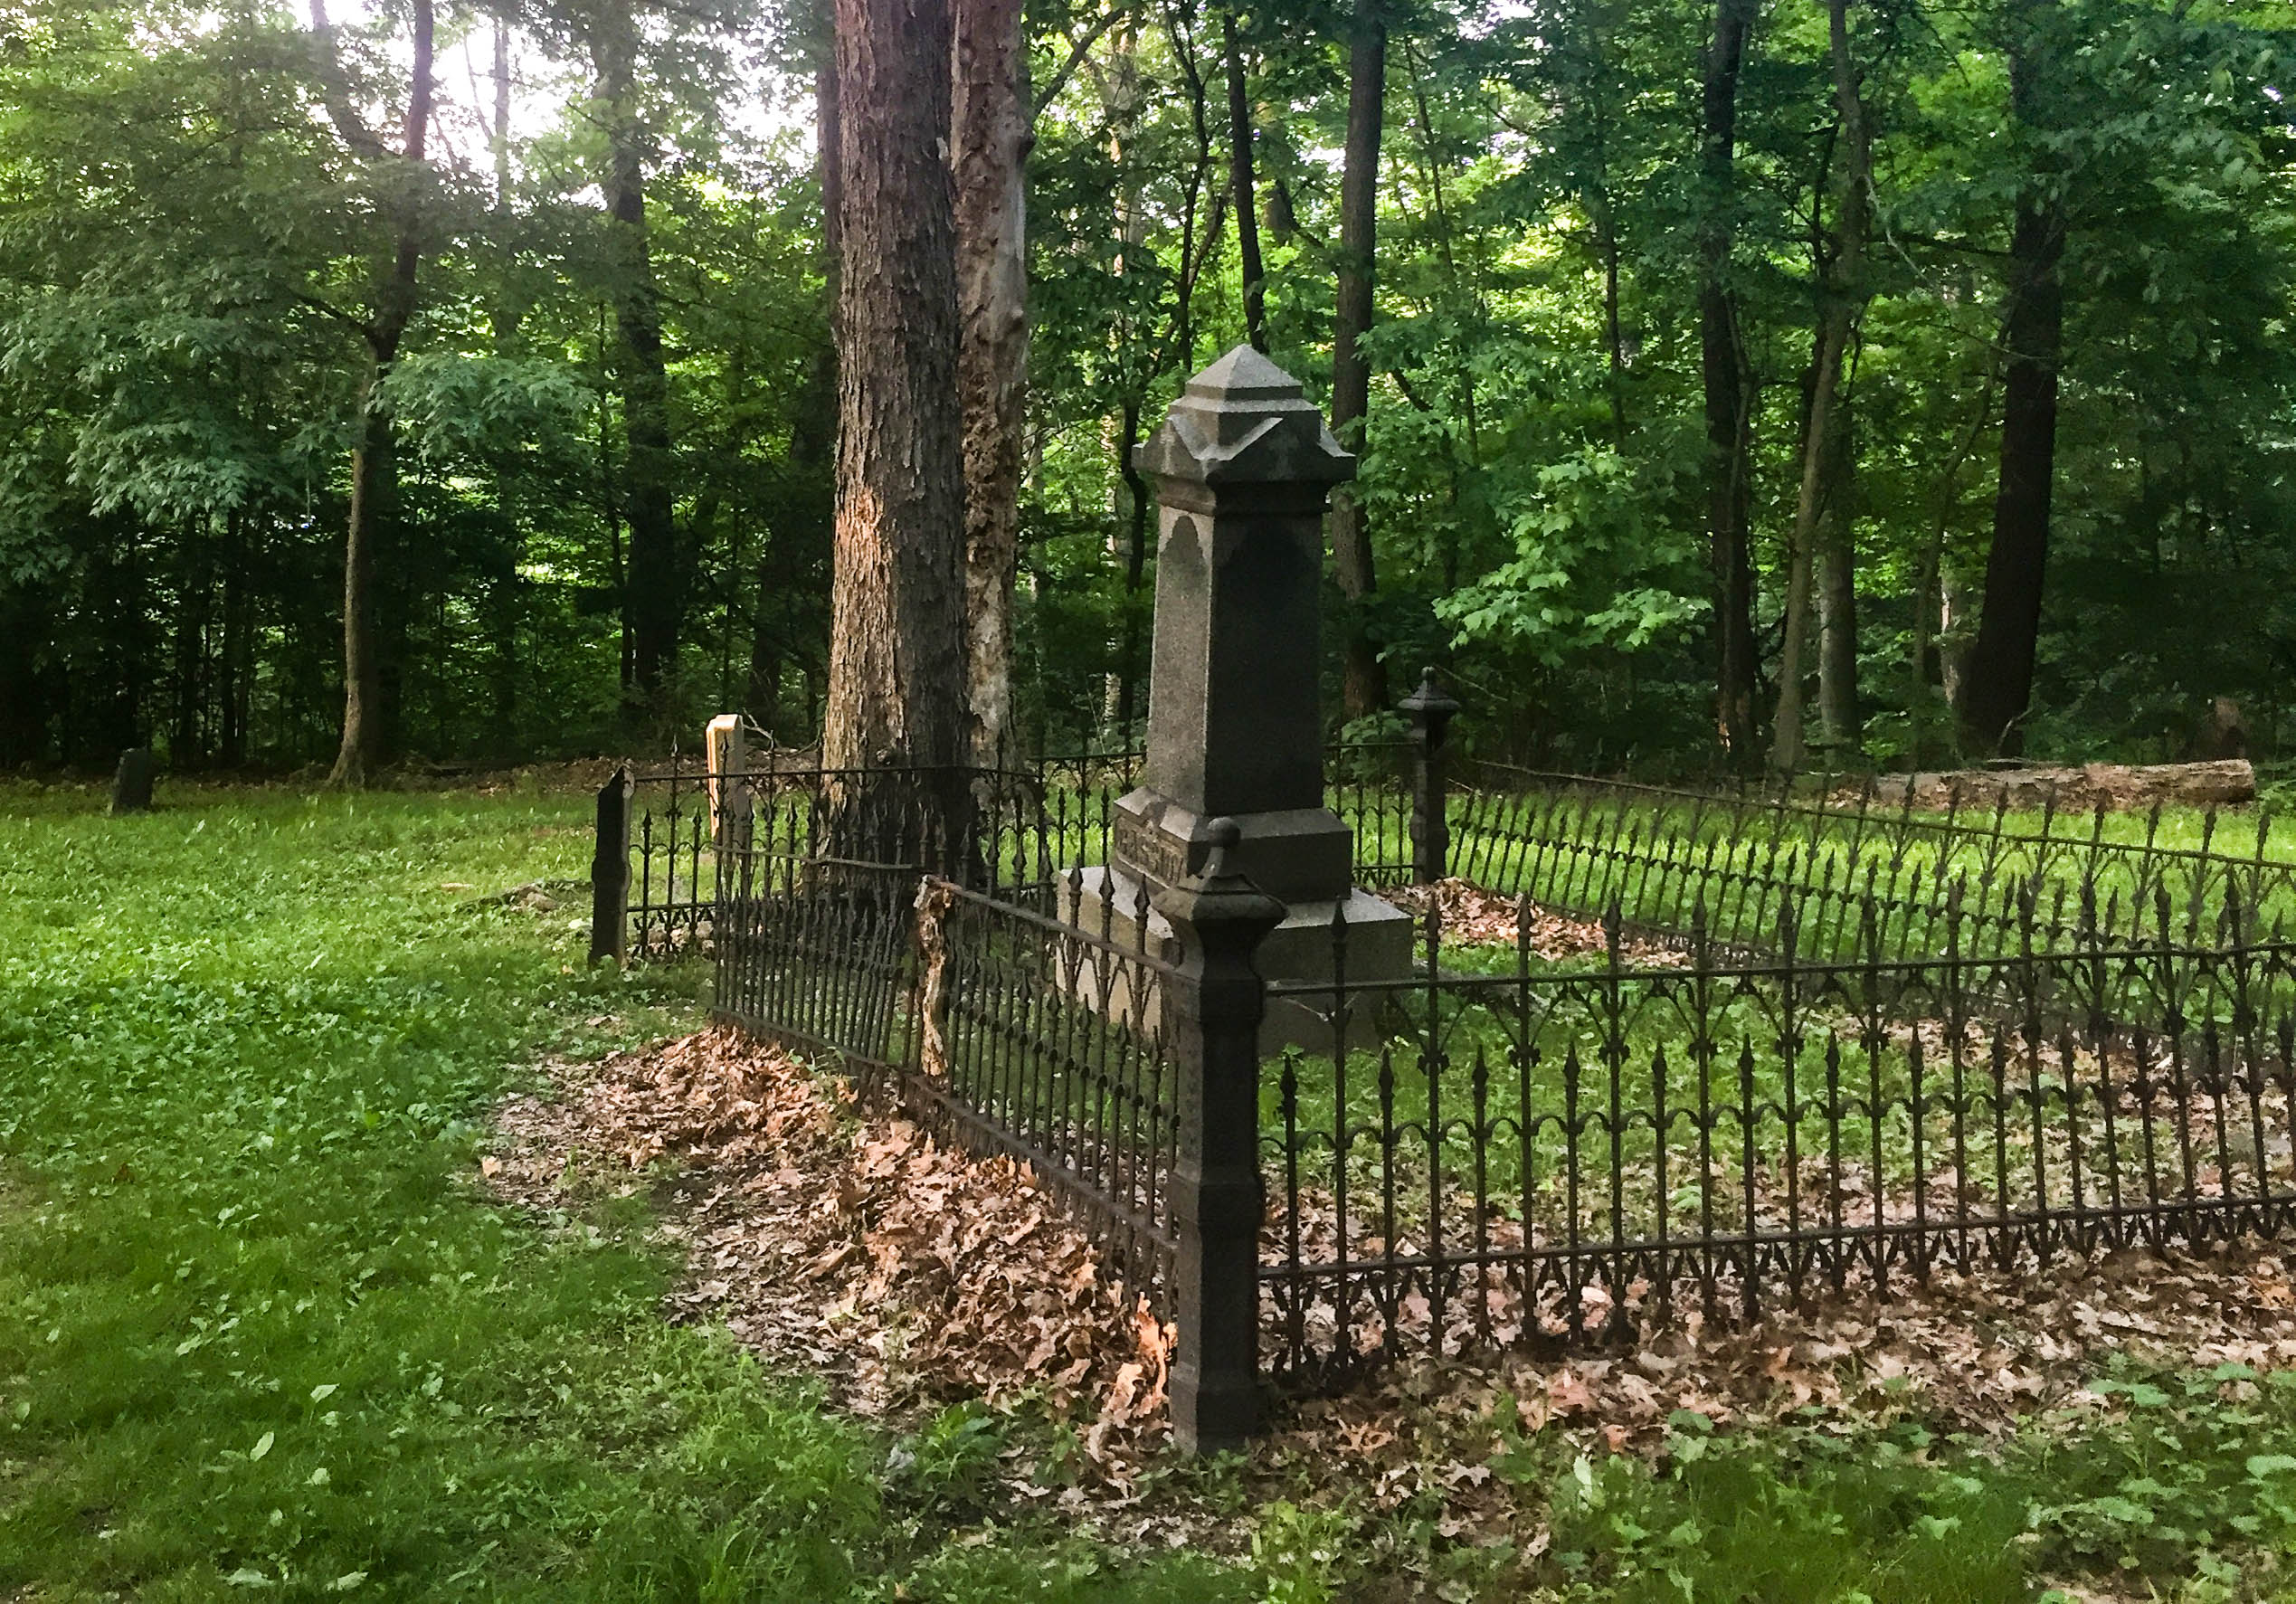 Stone marker surrounded by an iron fence